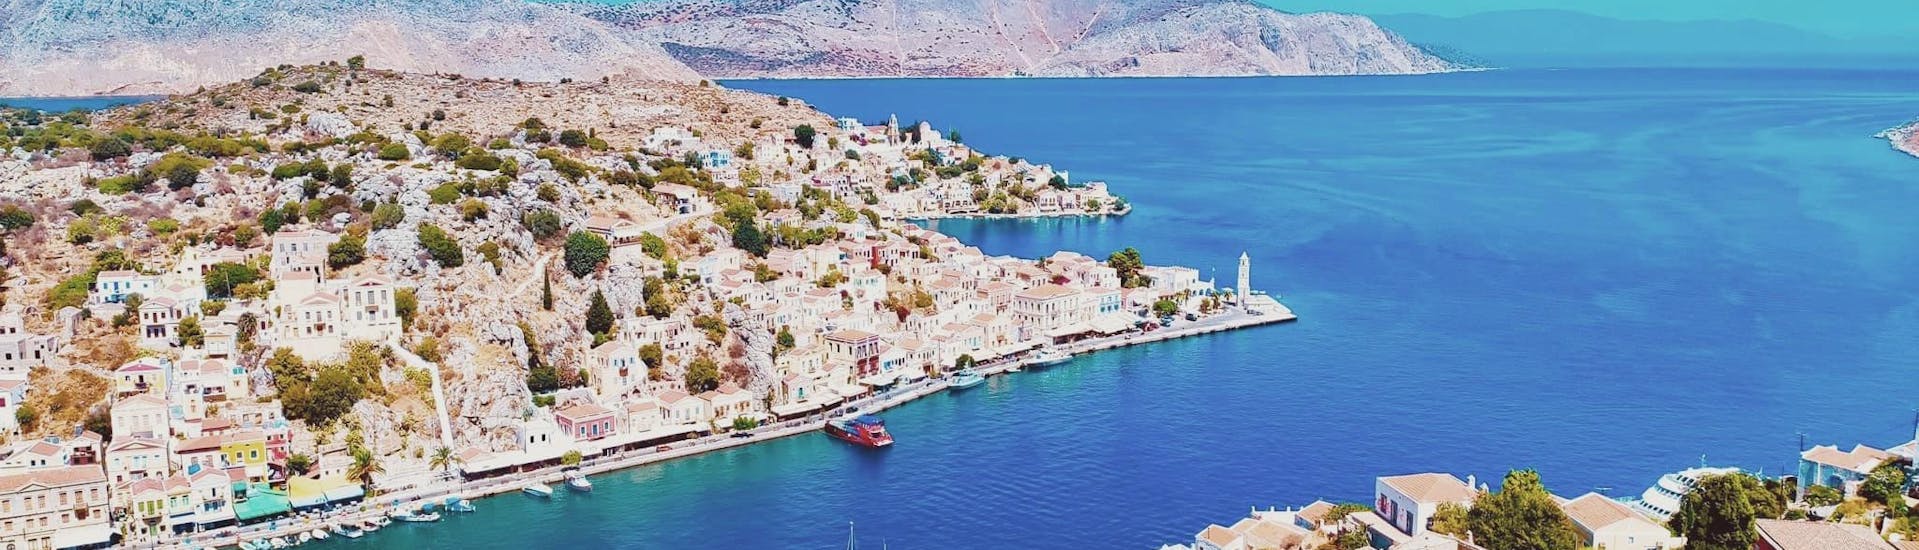 Boat Trip to Symi Island with Swimming Stop from Kolymbia.